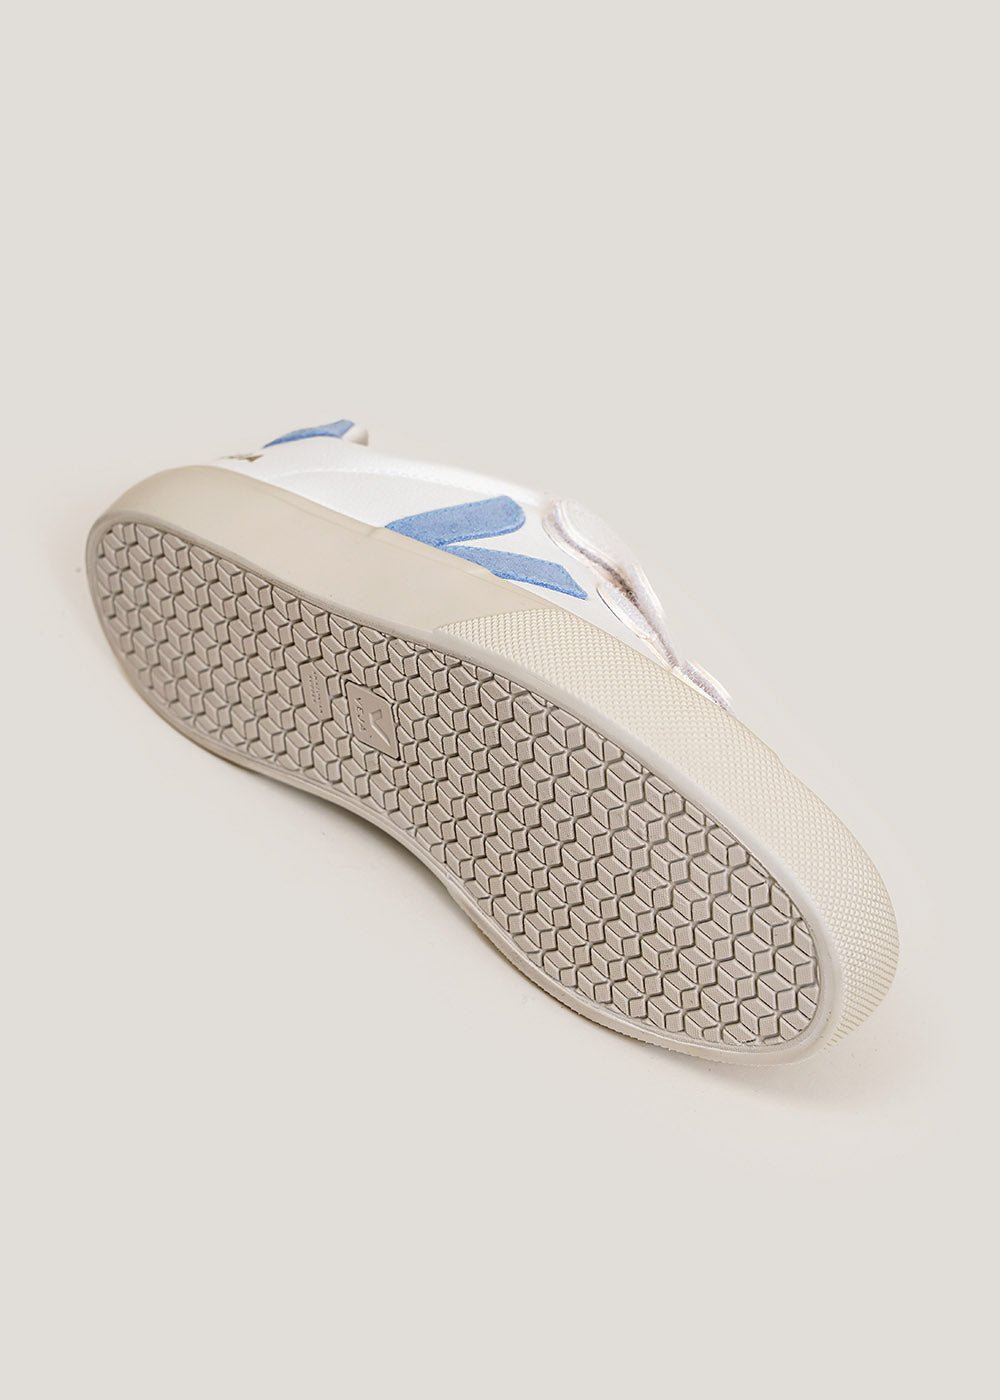 Veja White Steel Recife Sneakers - New Classics Studios Sustainable Ethical Fashion Canada